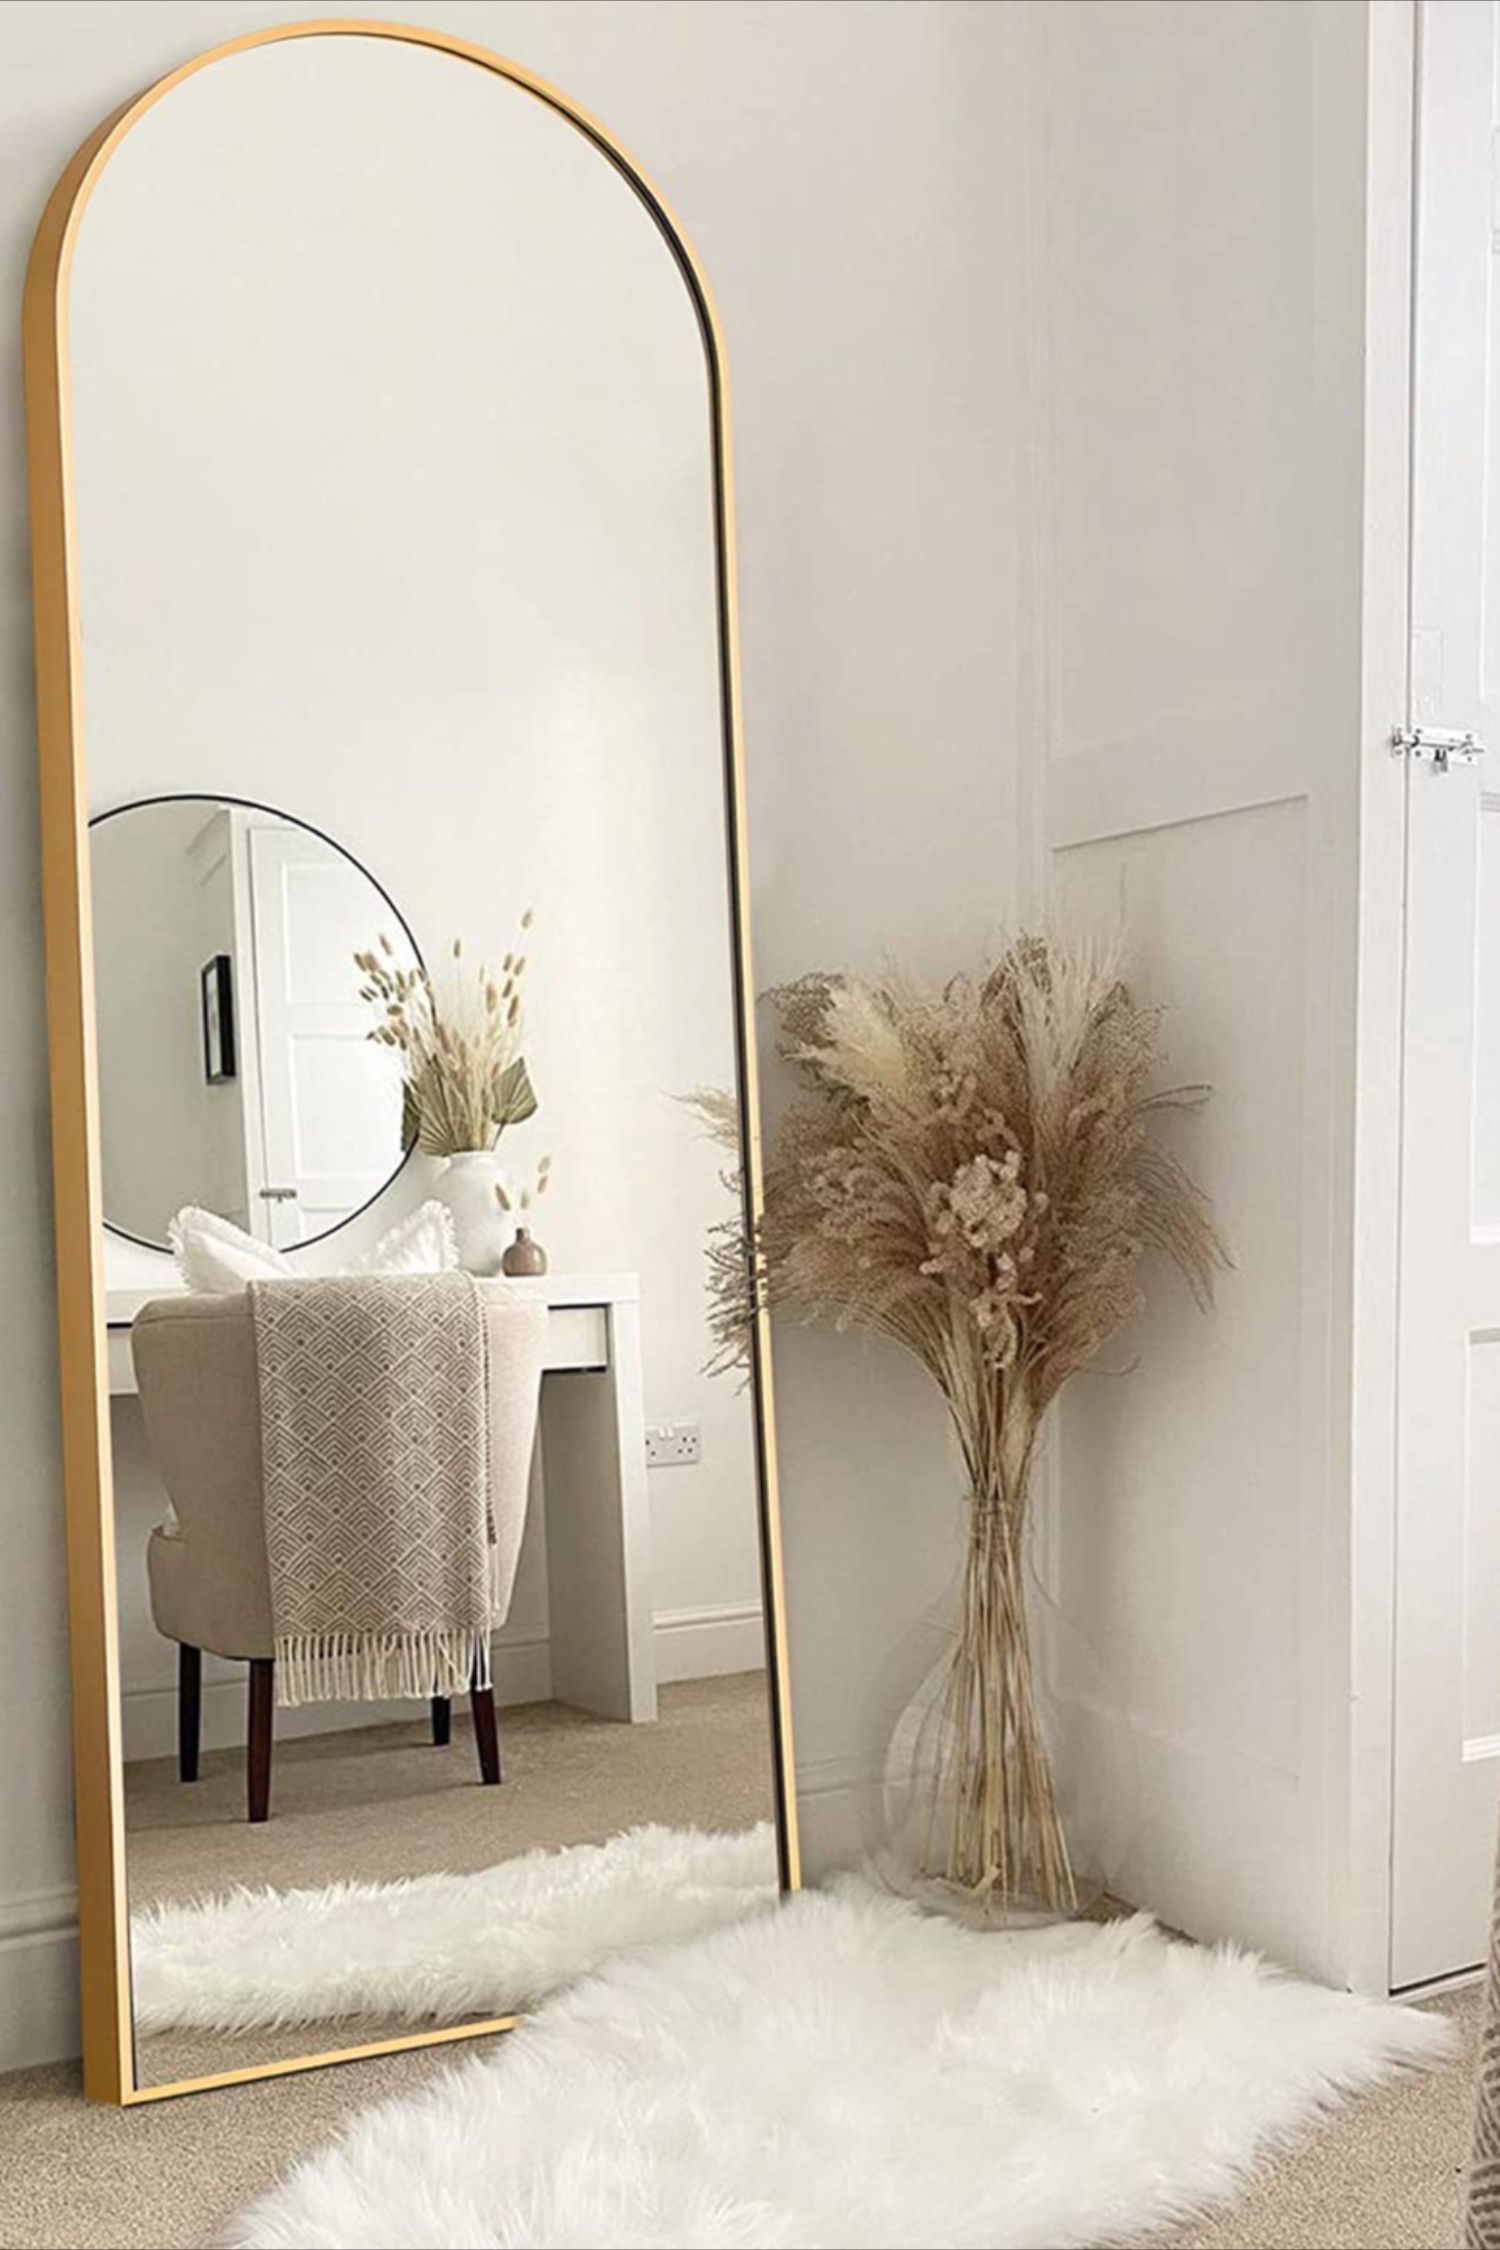 Reflect Your Style: Wall Mirror Designs for Every Space